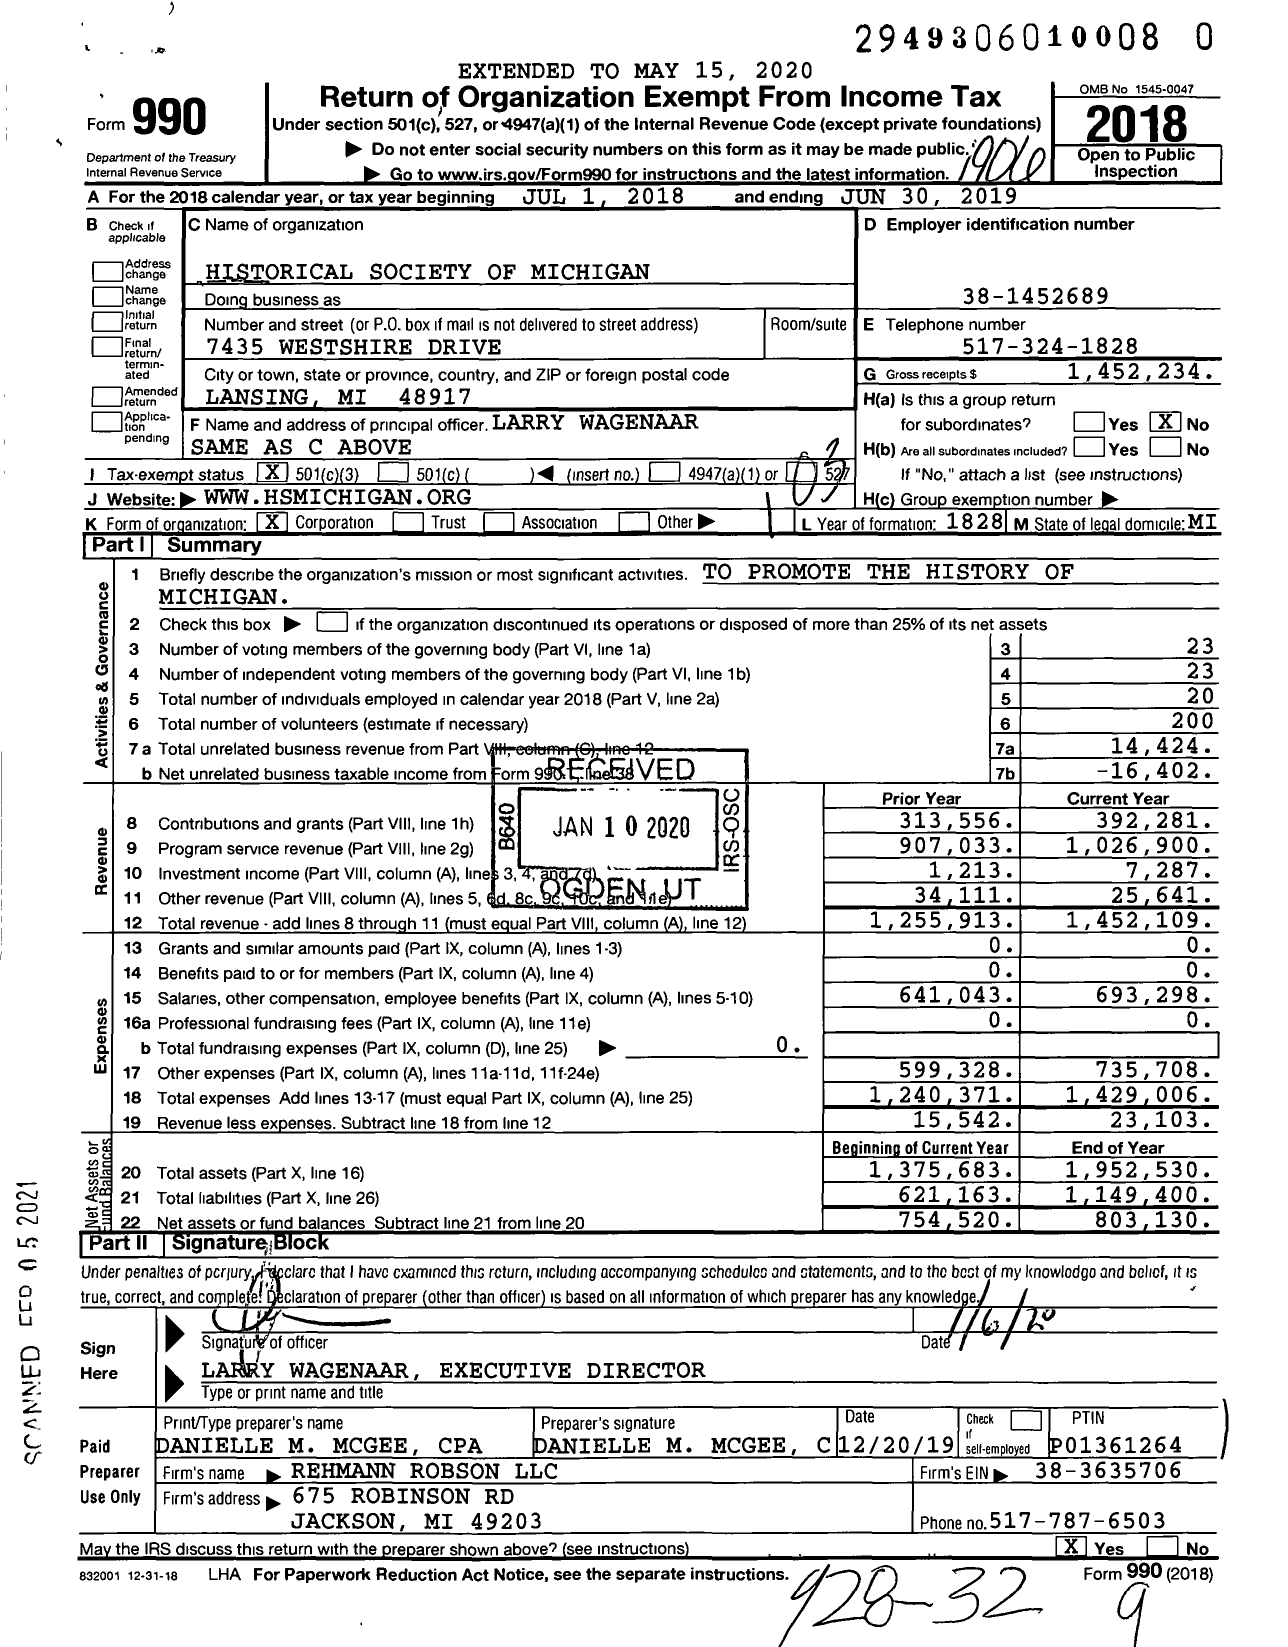 Image of first page of 2018 Form 990 for Historical Society of Michigan (HSM)